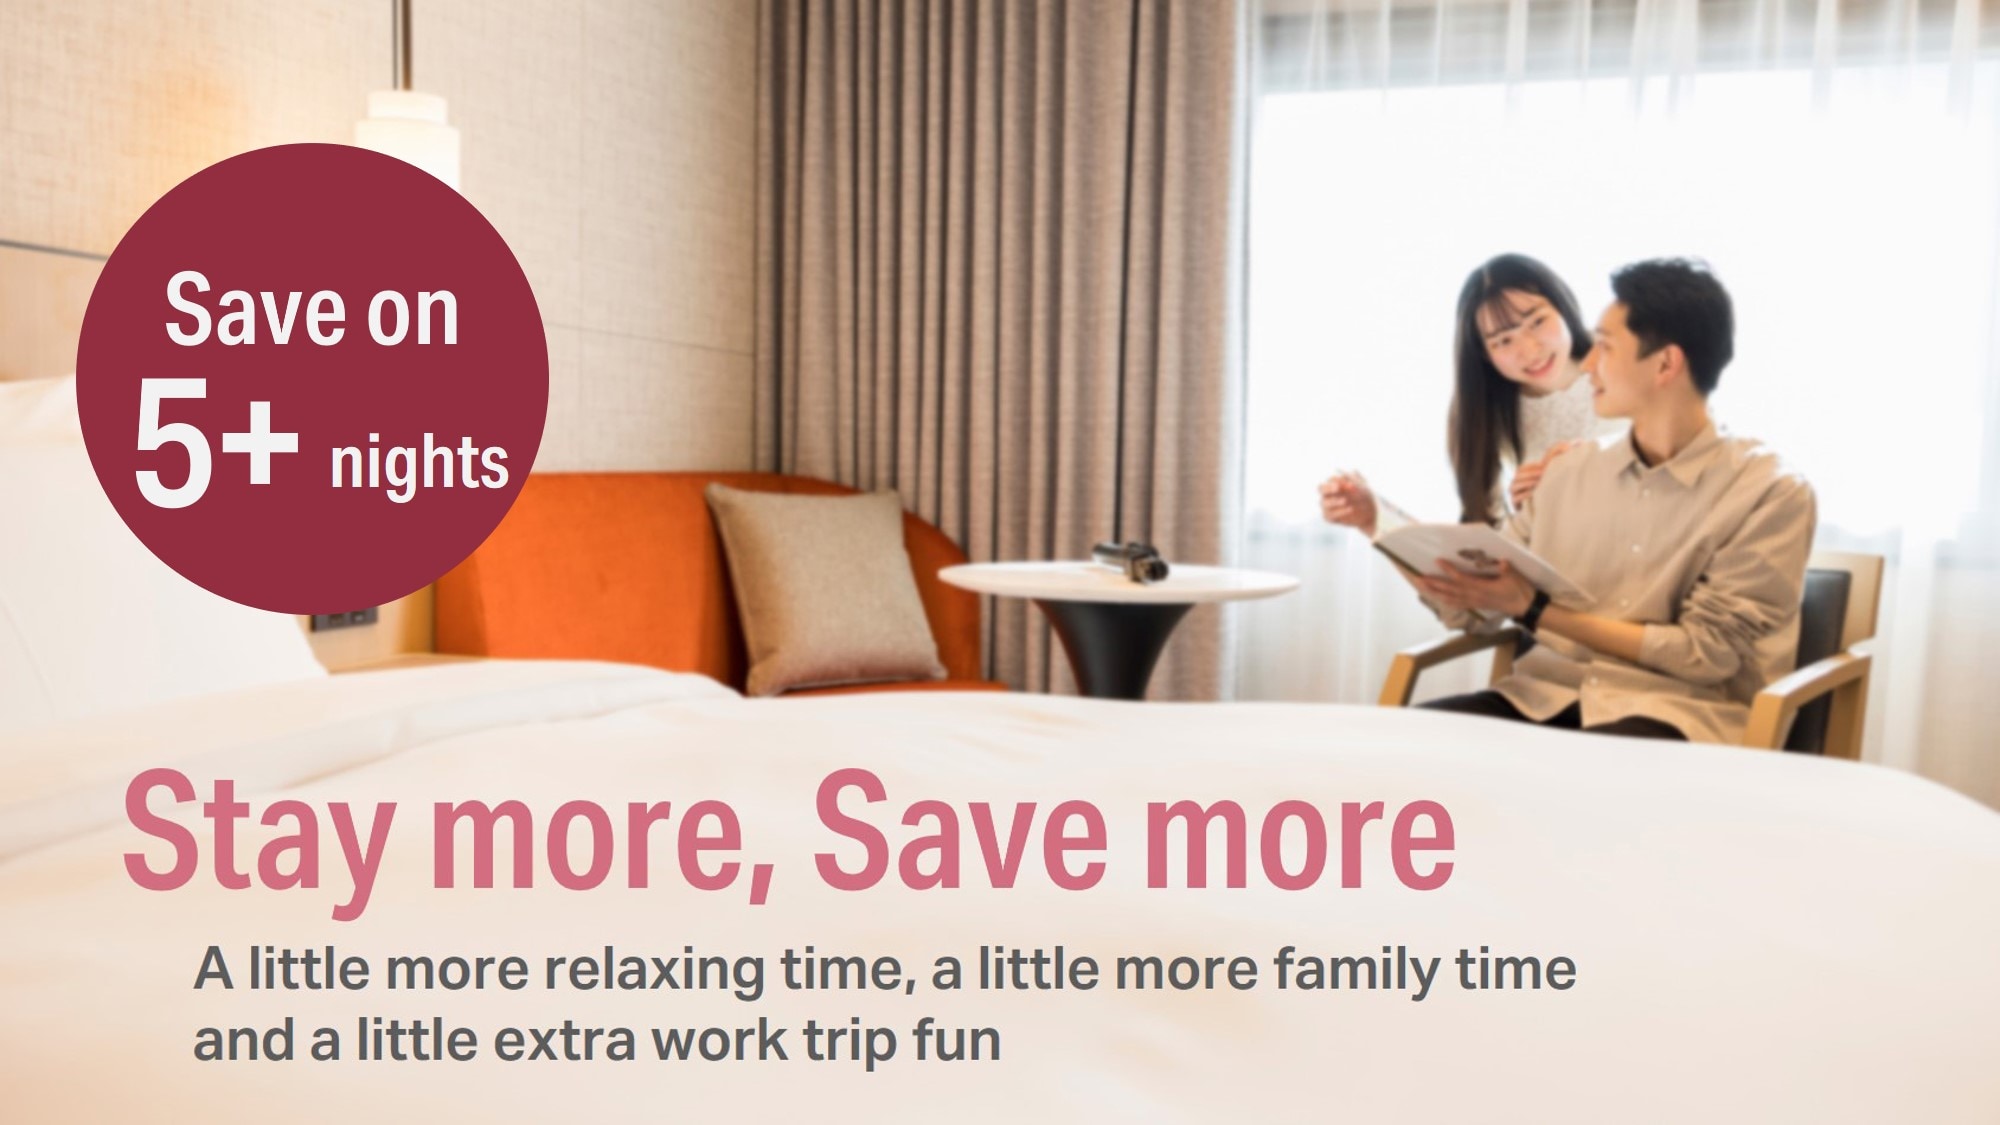 Consecutive night plan for inbound tourists 5 nights